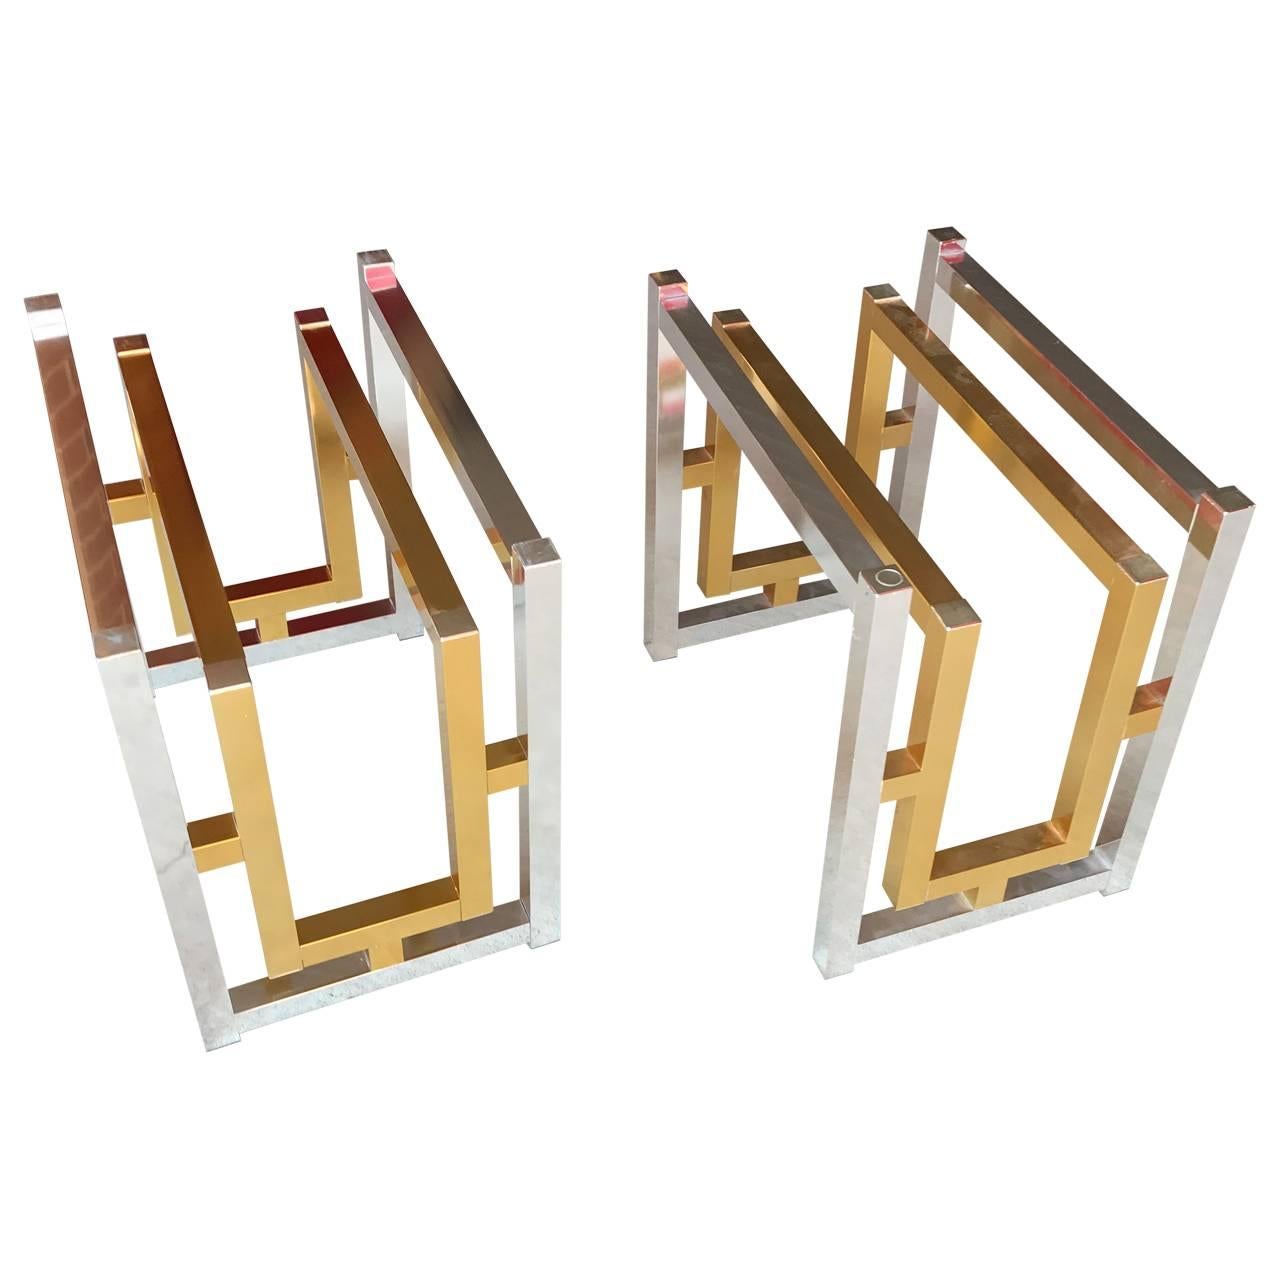 Sharp looking pair of geometric chrome and brass side tables.
Tables without glass tops measures; 21.5 inches  x 14 inches
Bases can hold many sized and shapes, eg round, square or one large single piece of glass.